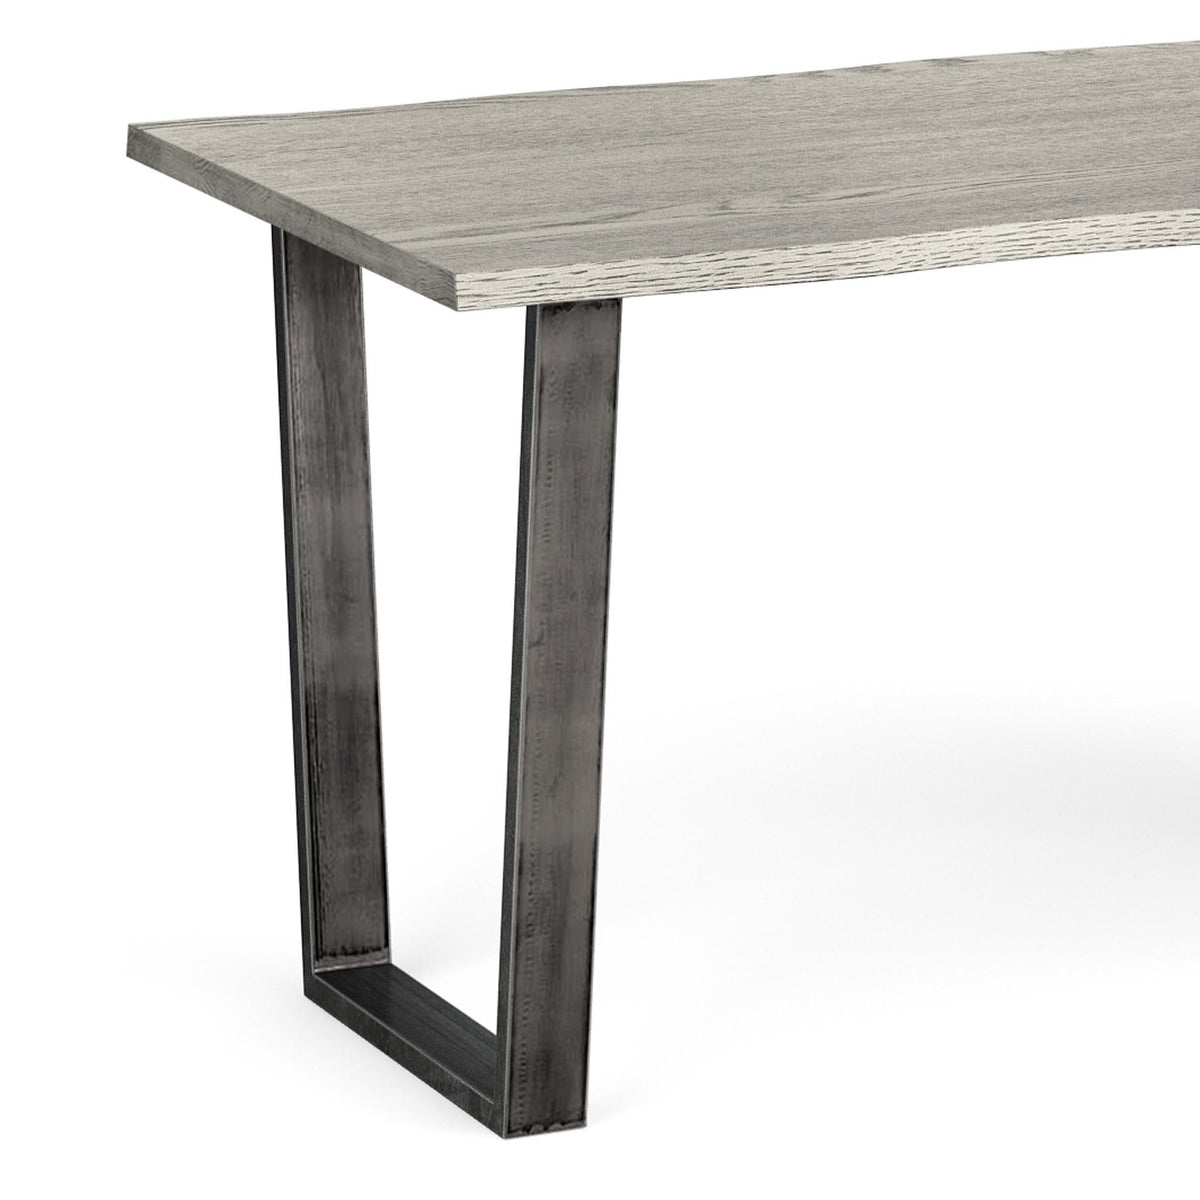 The Soho Grey Industrial Dining Table 140cm - Close up of legs